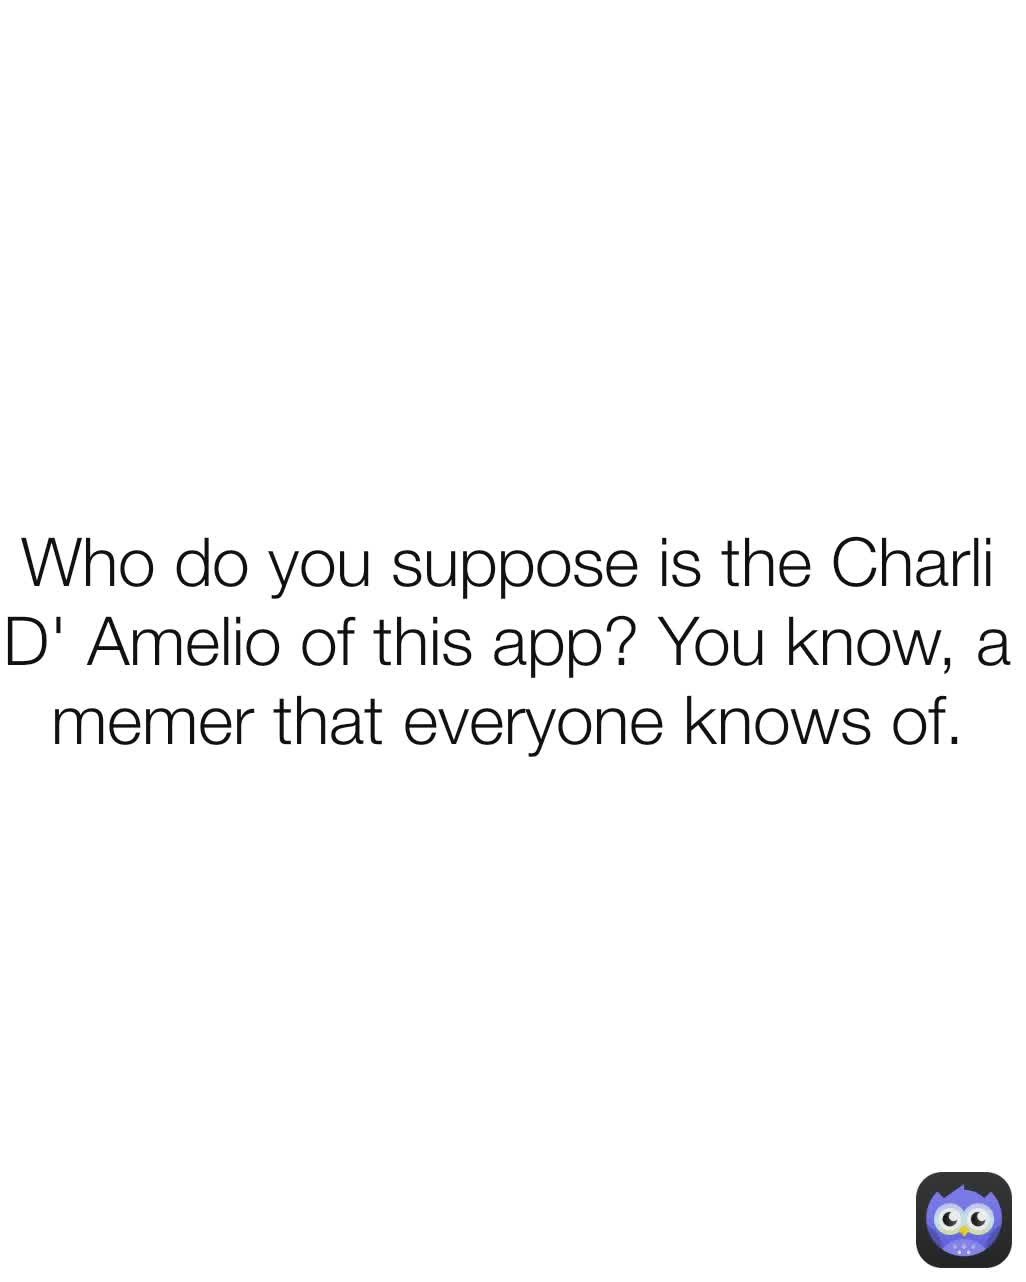 Who do you suppose is the Charli D' Amelio of this app? You know, a memer that everyone knows of.